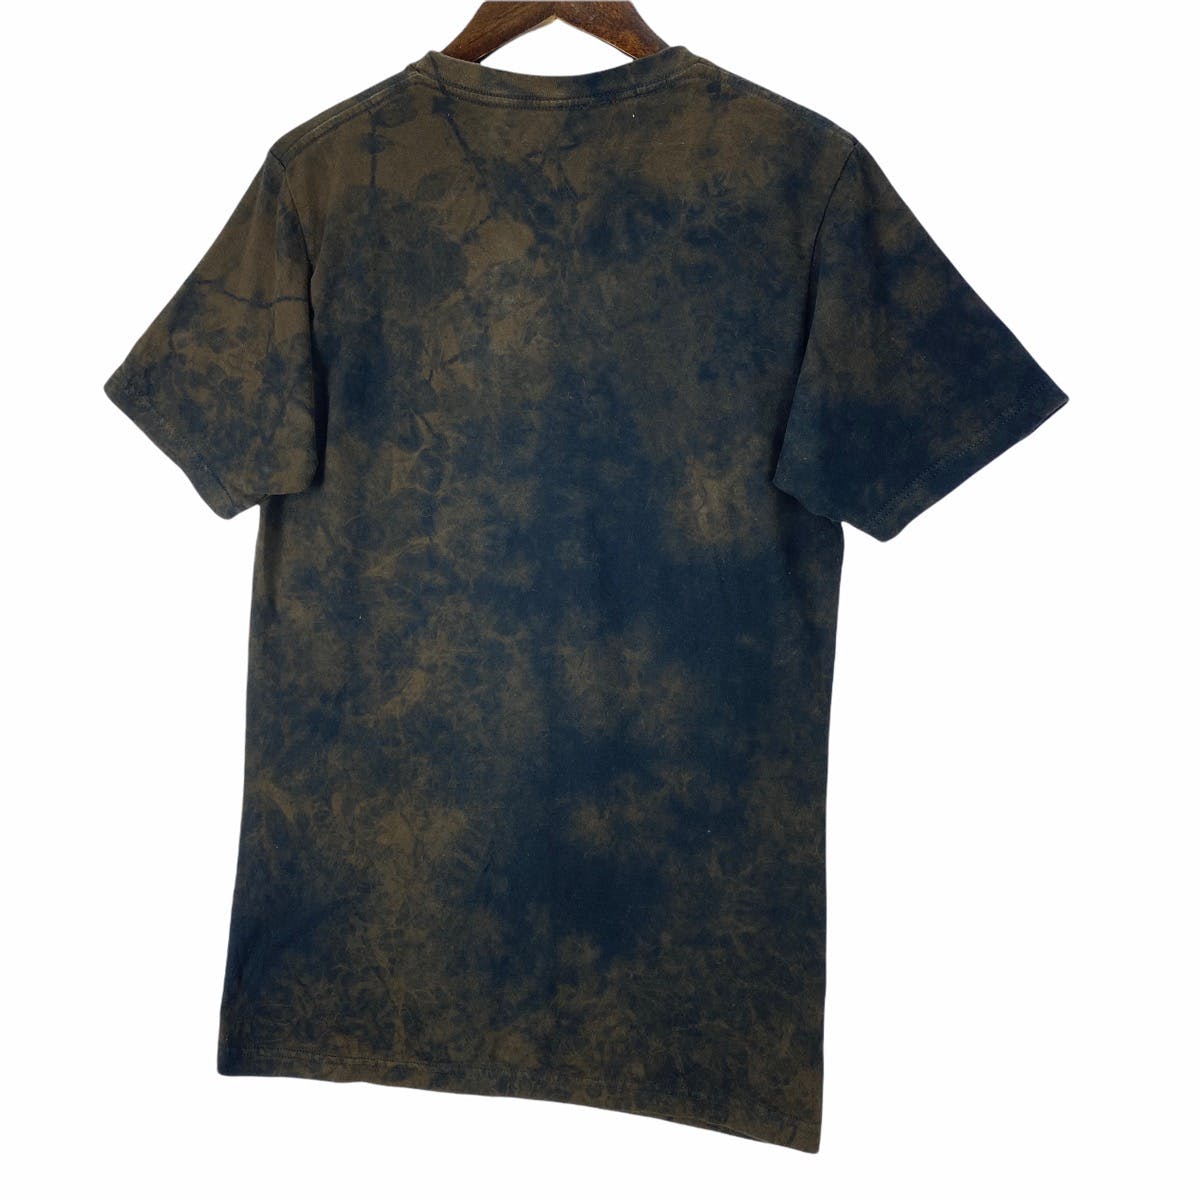 Death Row Records Acid Wash Embroidery T Shirt - 7